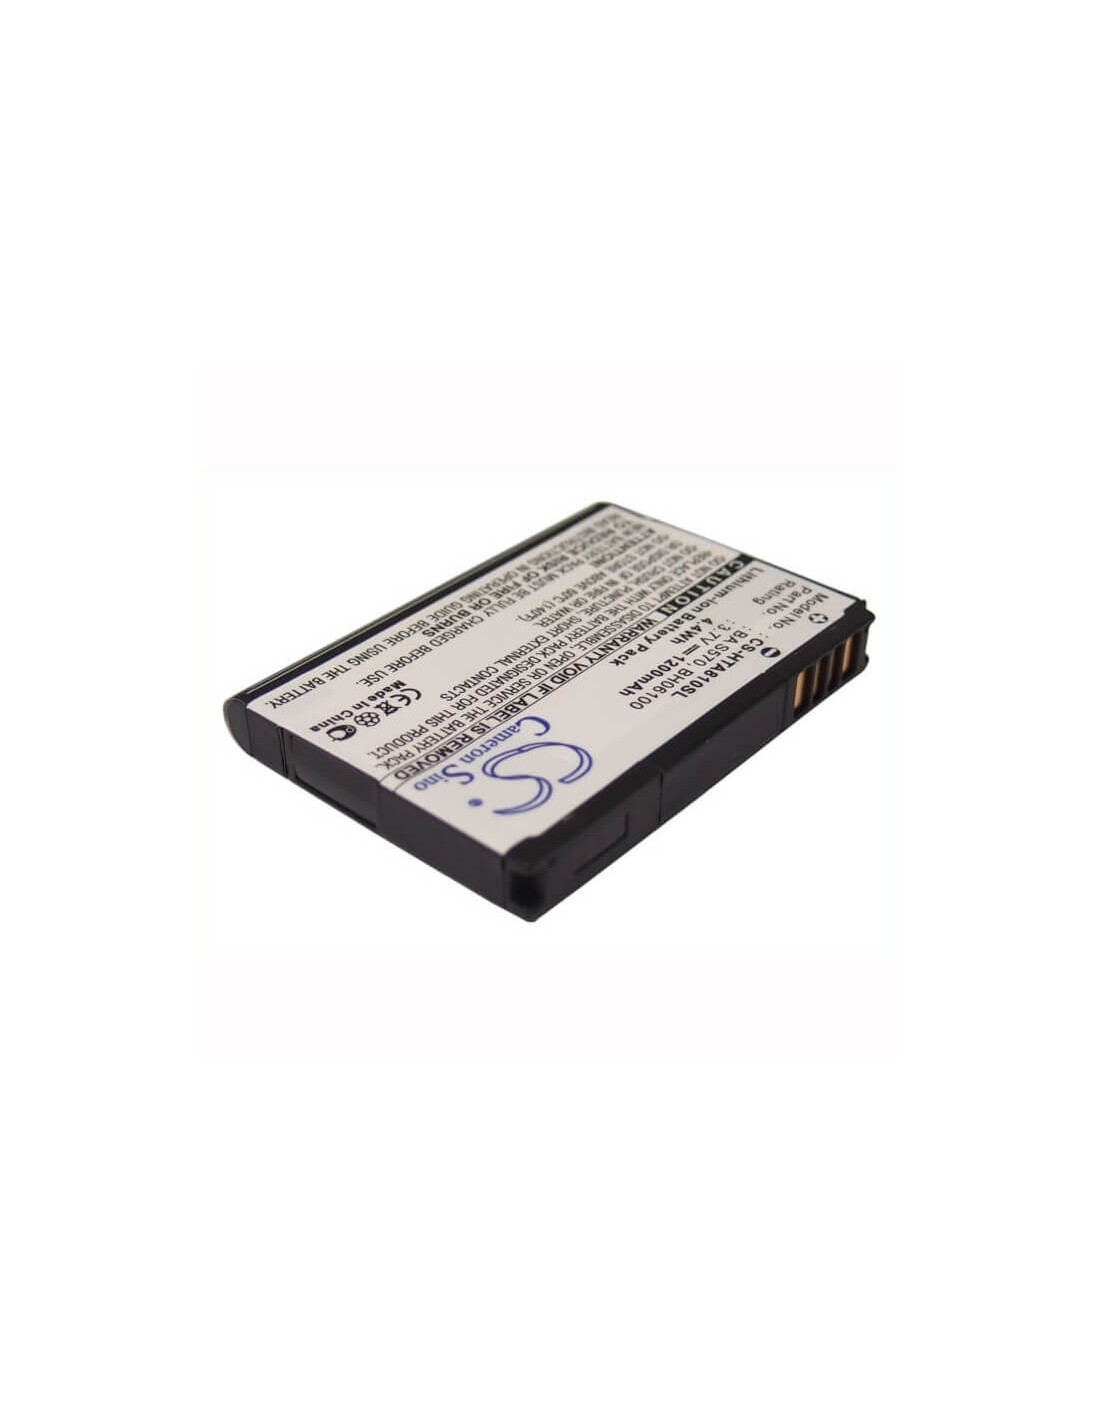 Battery for HTC Chacha, Chacha A810E, PH06130 3.7V, 1200mAh - 4.44Wh